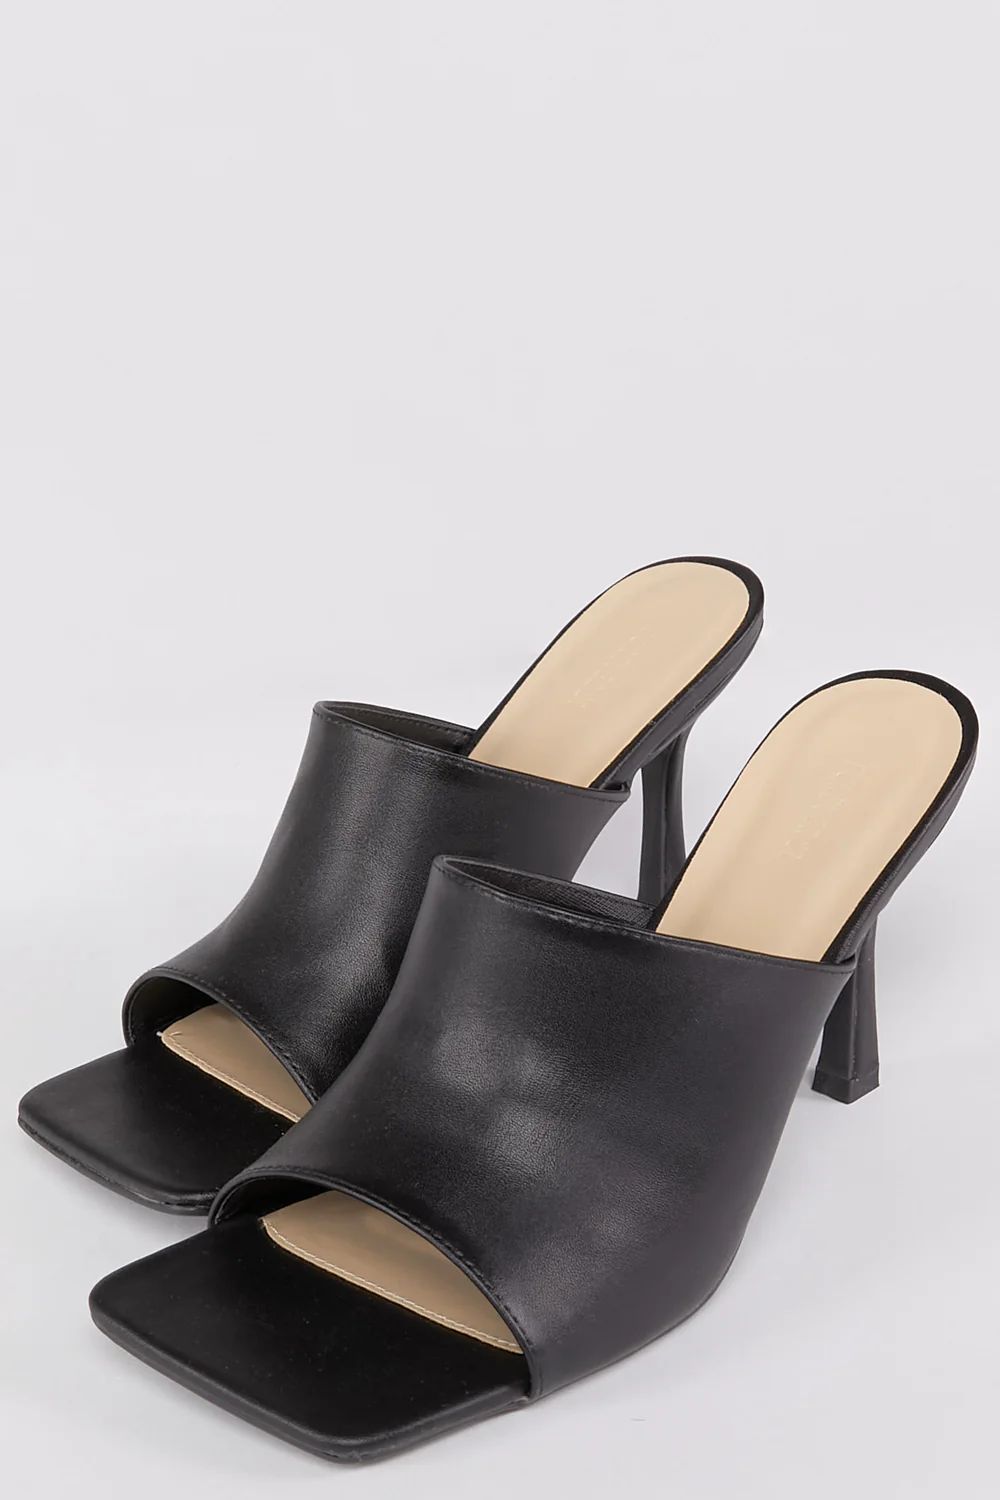 Wide Band Stiletto Mule High Heel
– Forever 21 | Forever 21 CA